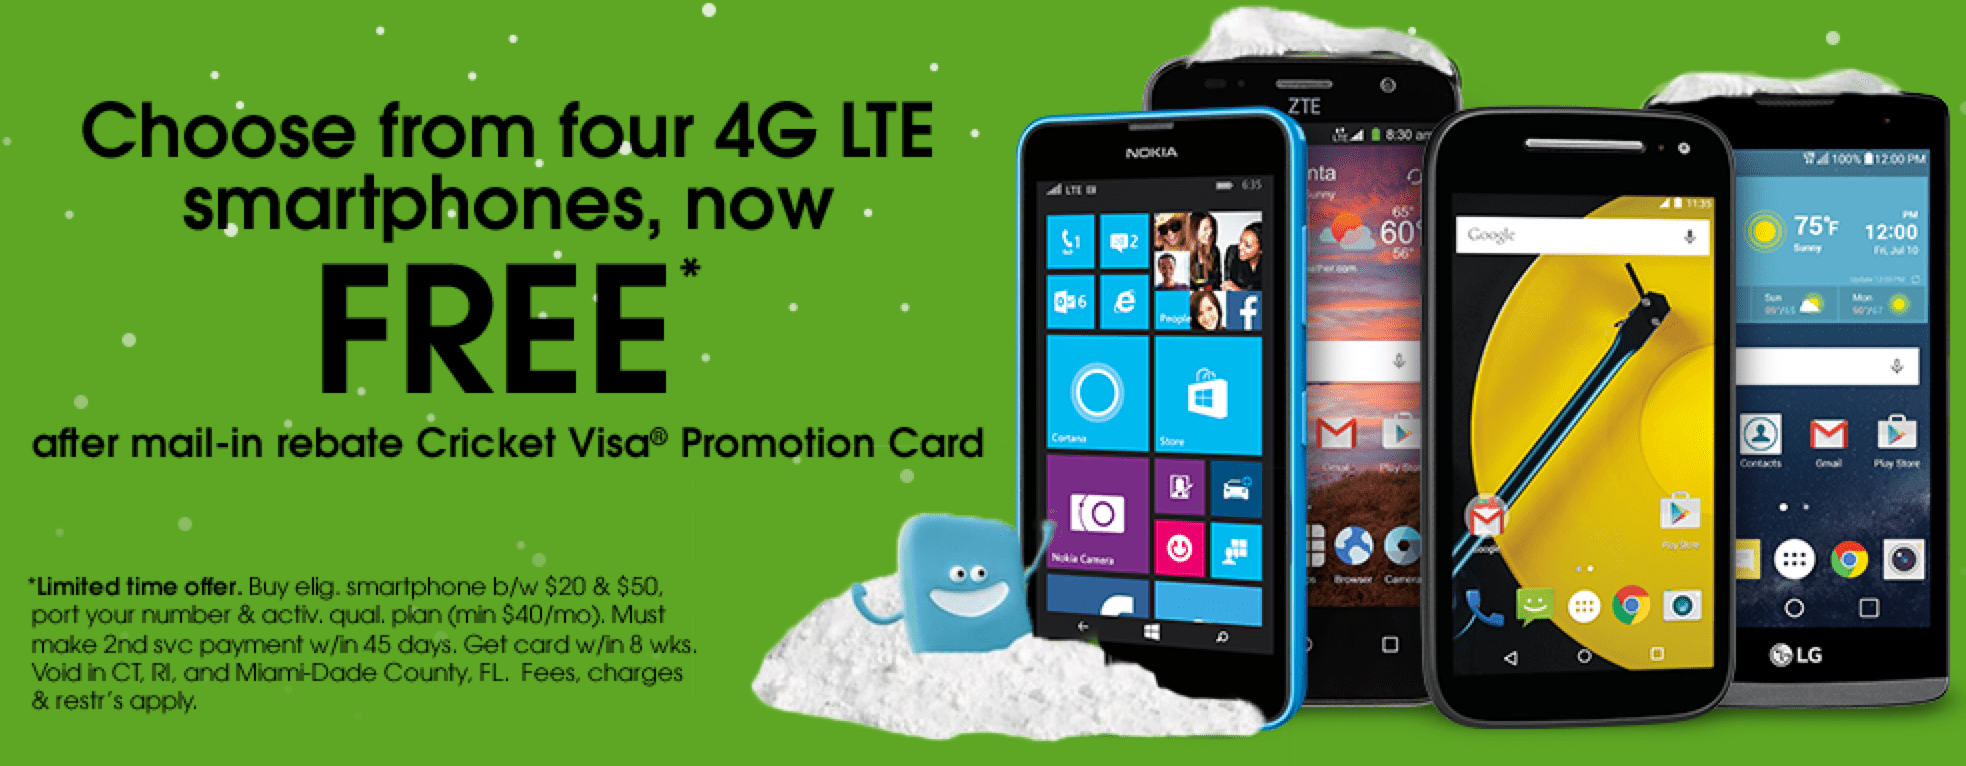 Cricket Wireless Choice Of FOUR Free 4G LTE Smartphones After Mail In 